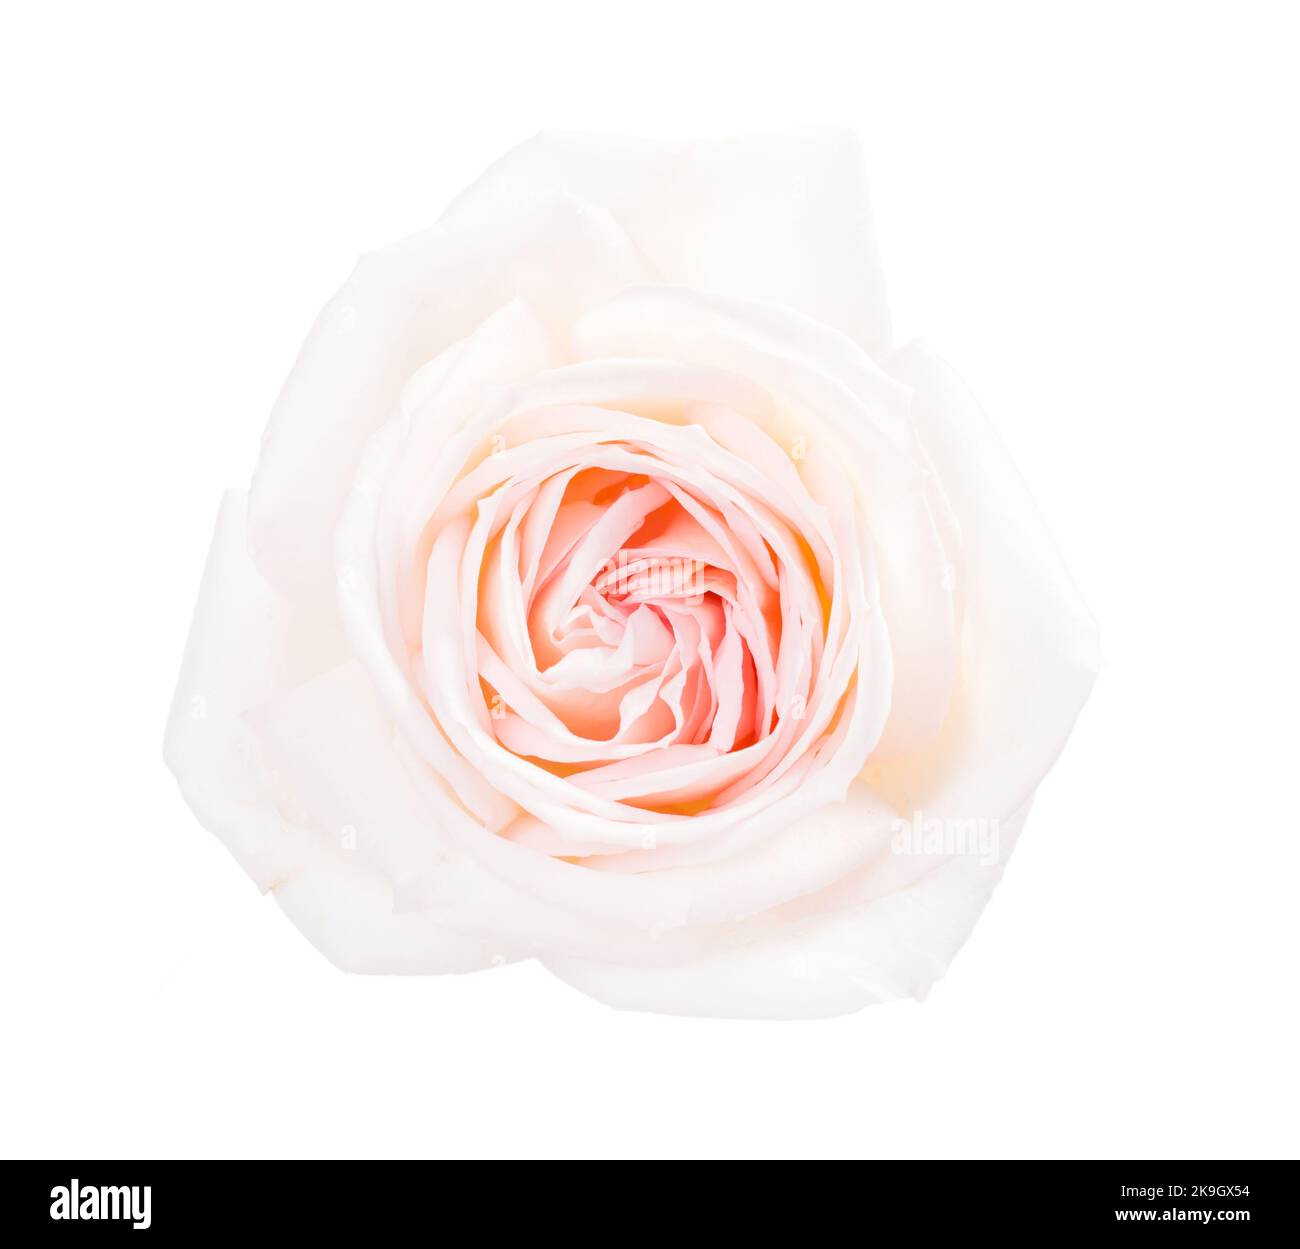 White rose with a pale pink center isolated on white background Stock Photo